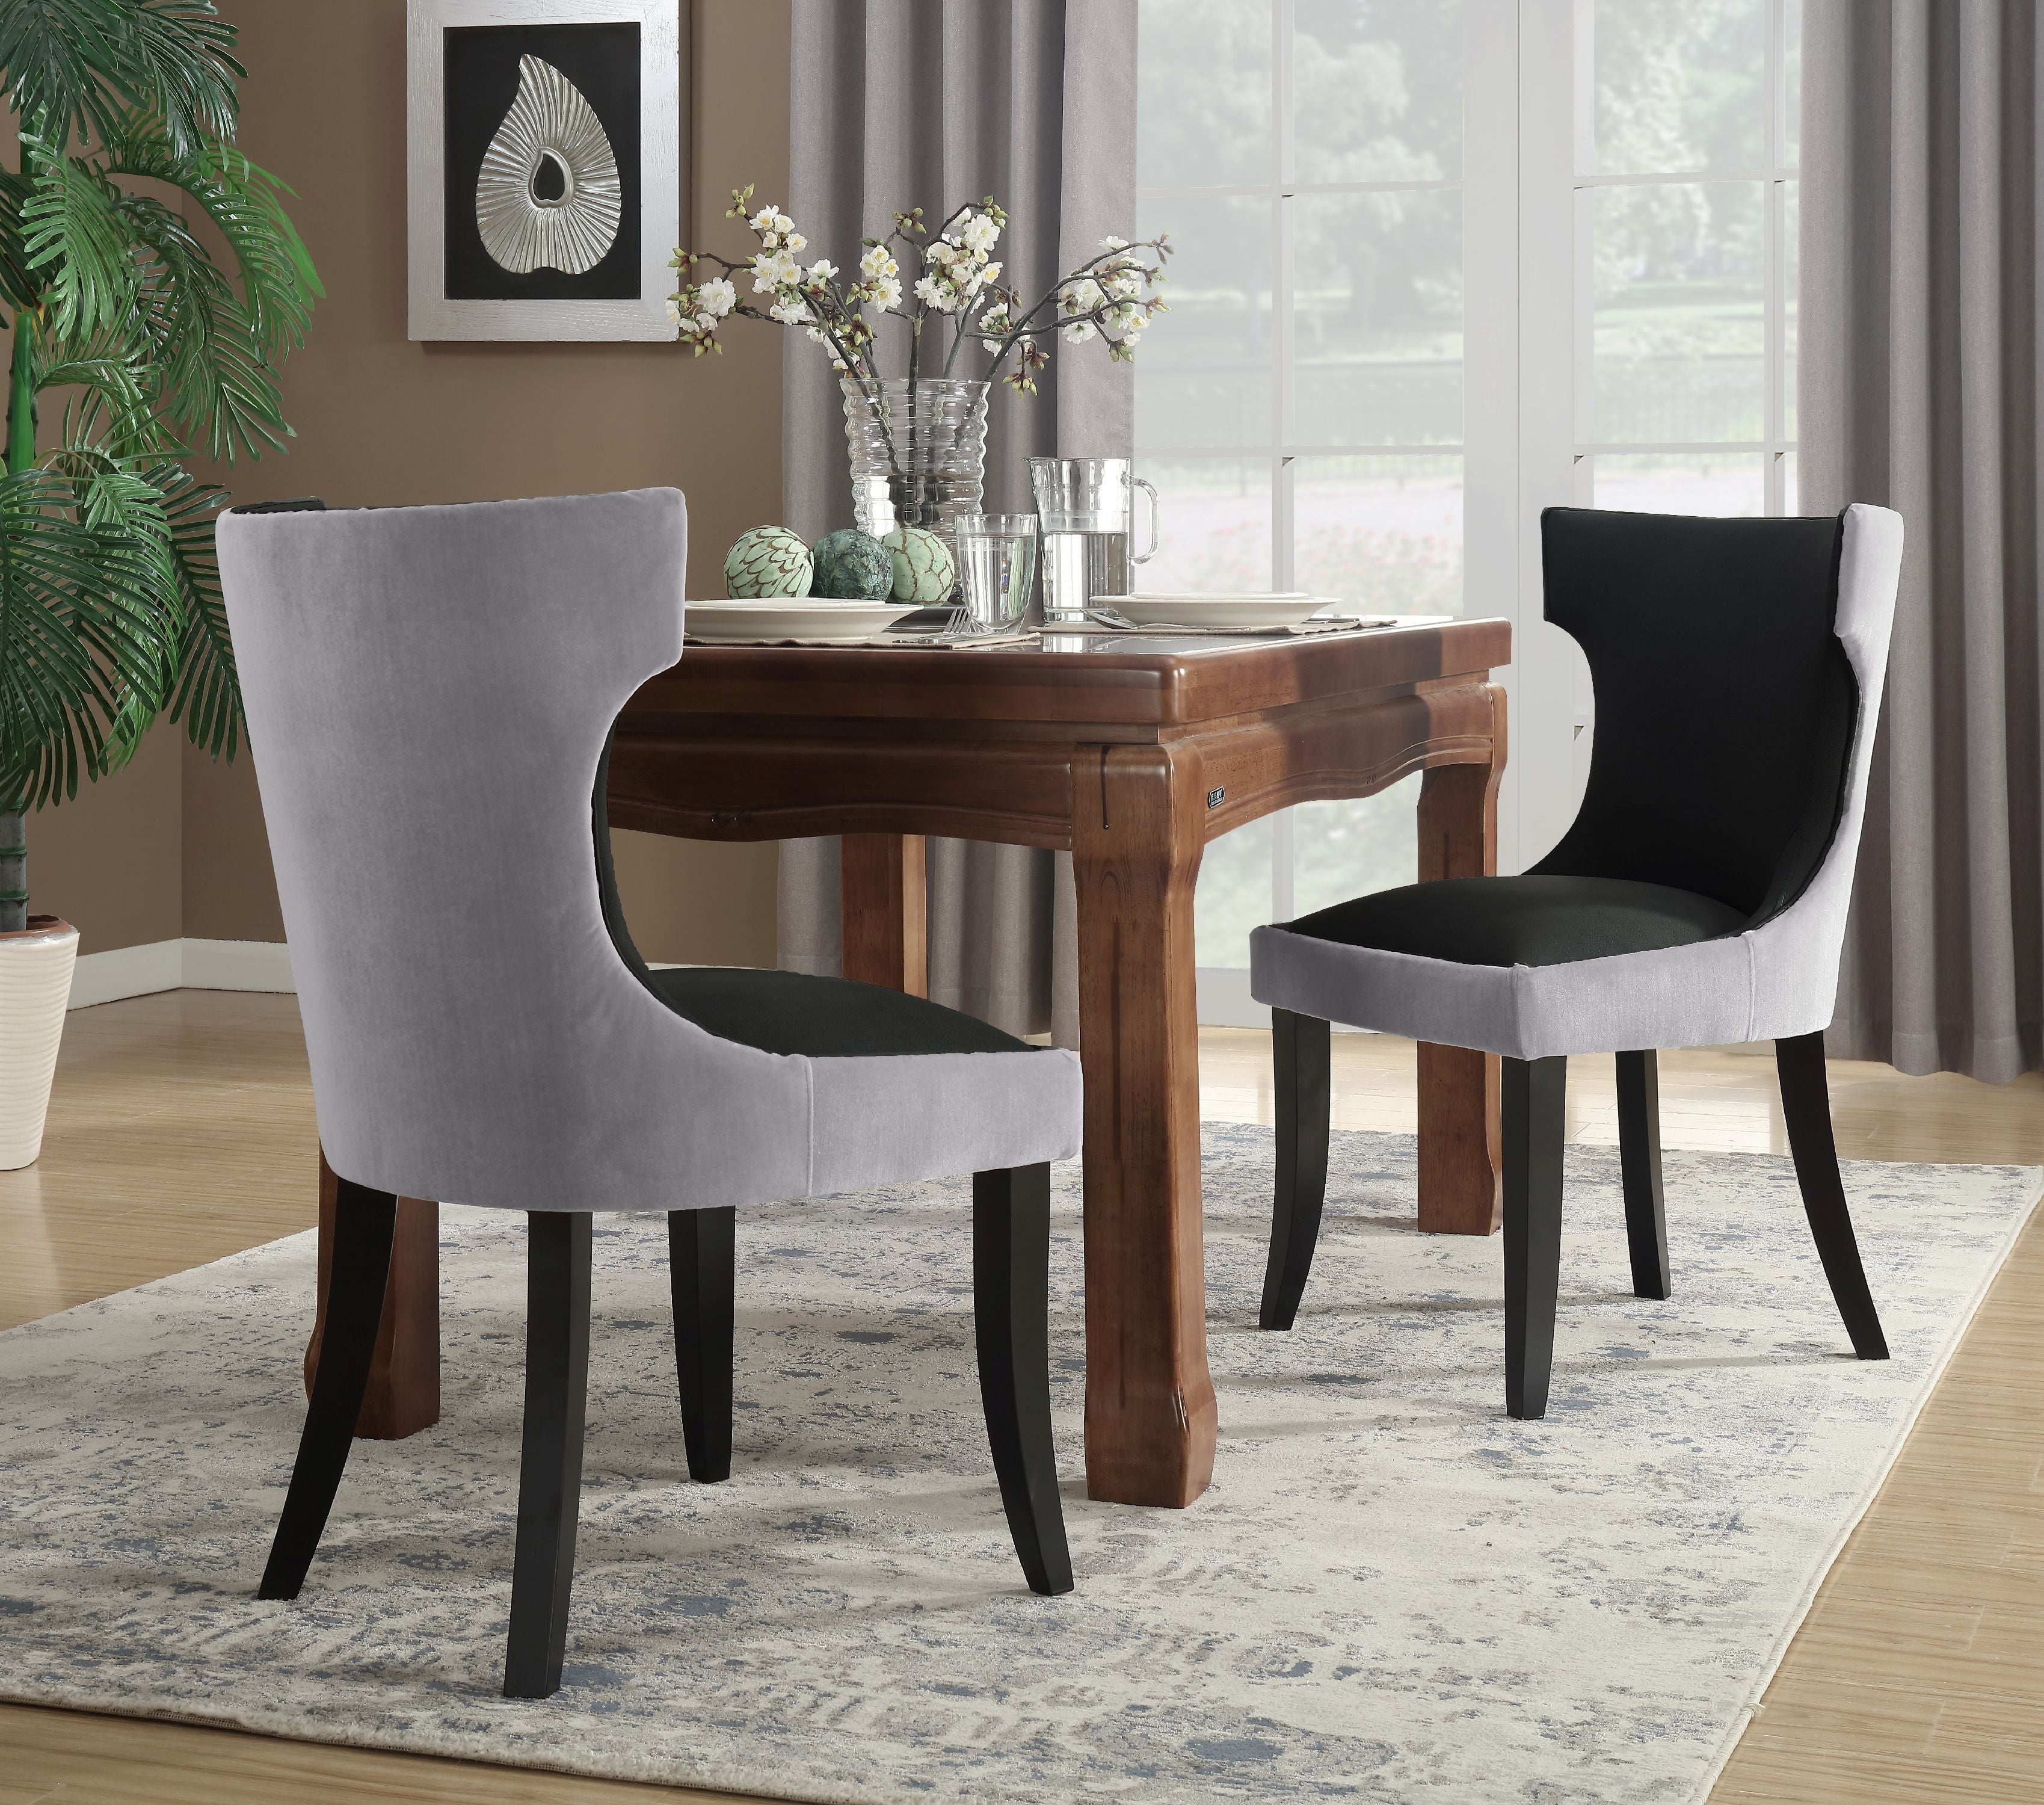 Picture of Chic Home FDC2719 Zeke Dining Side Chair with Velvet PU Leather Espresso Wood Frame Modern Transitional, Grey & Black - 2 Piece